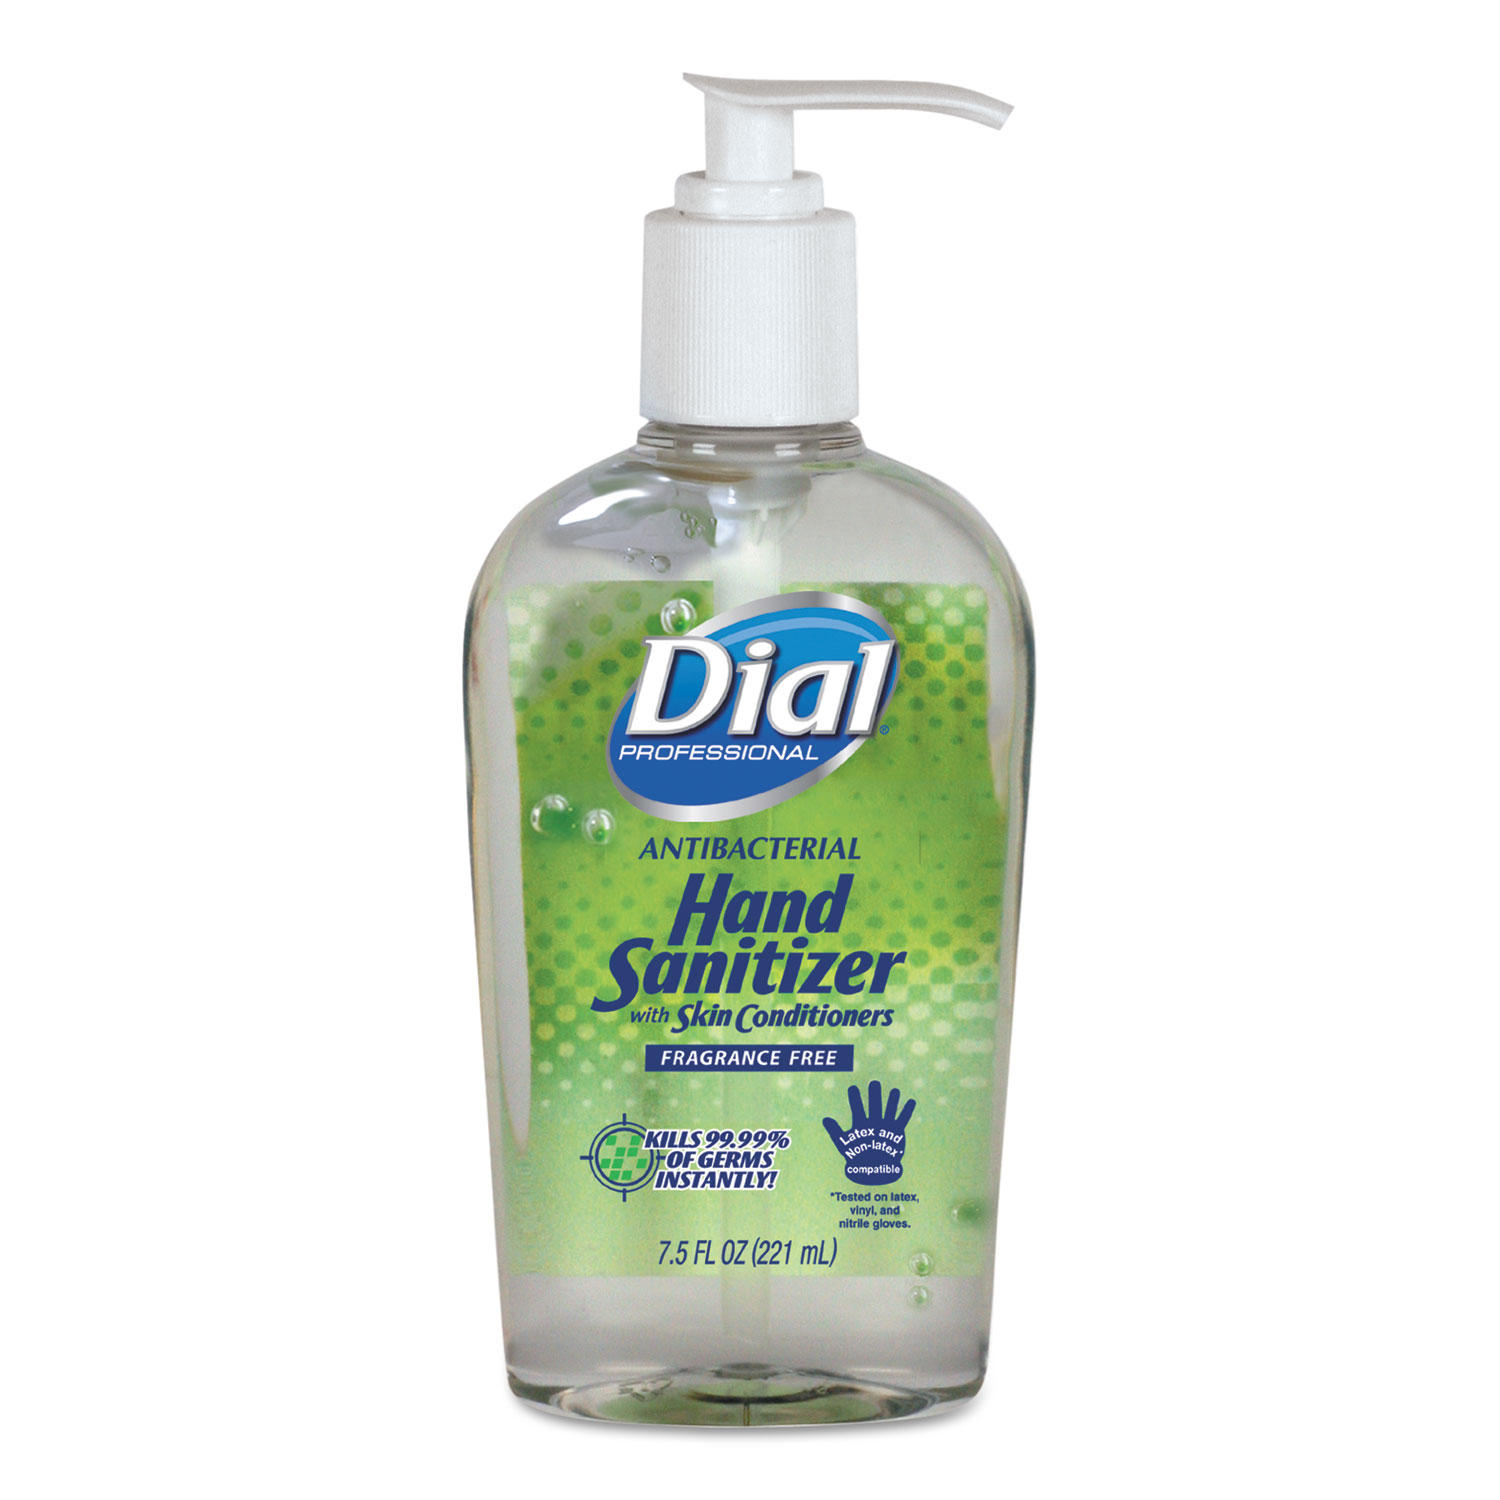  Dial Professional 2340001585 Antibacterial with Moisturizers Gel Hand Sanitizer, 7.5 oz, Pump, Fragrance-Free (DIA01585EA) 